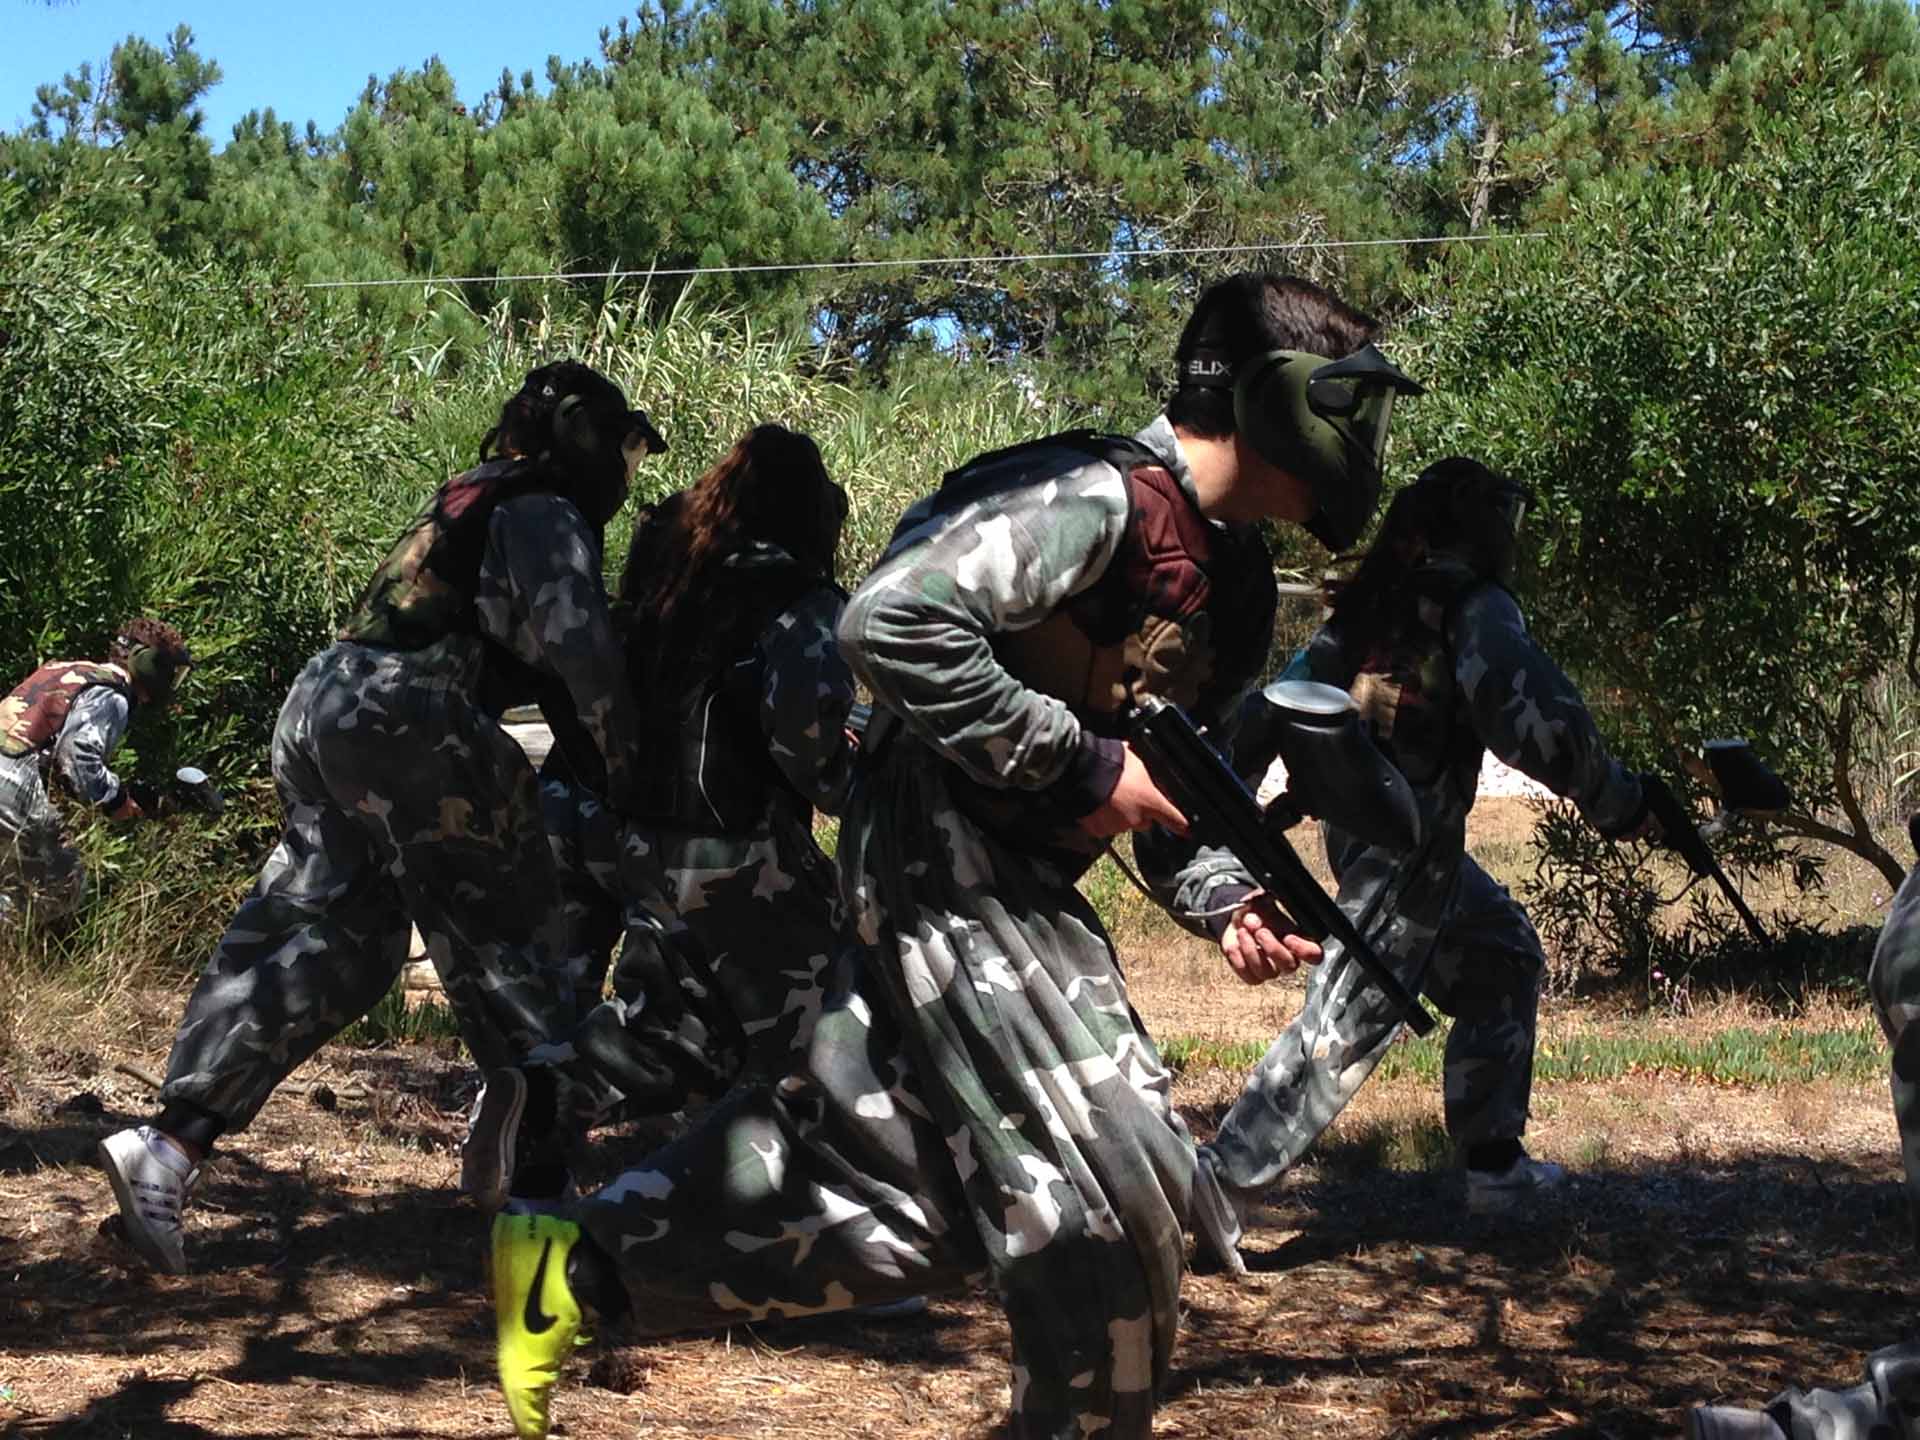 Paintball with uniform and 100 balls per player